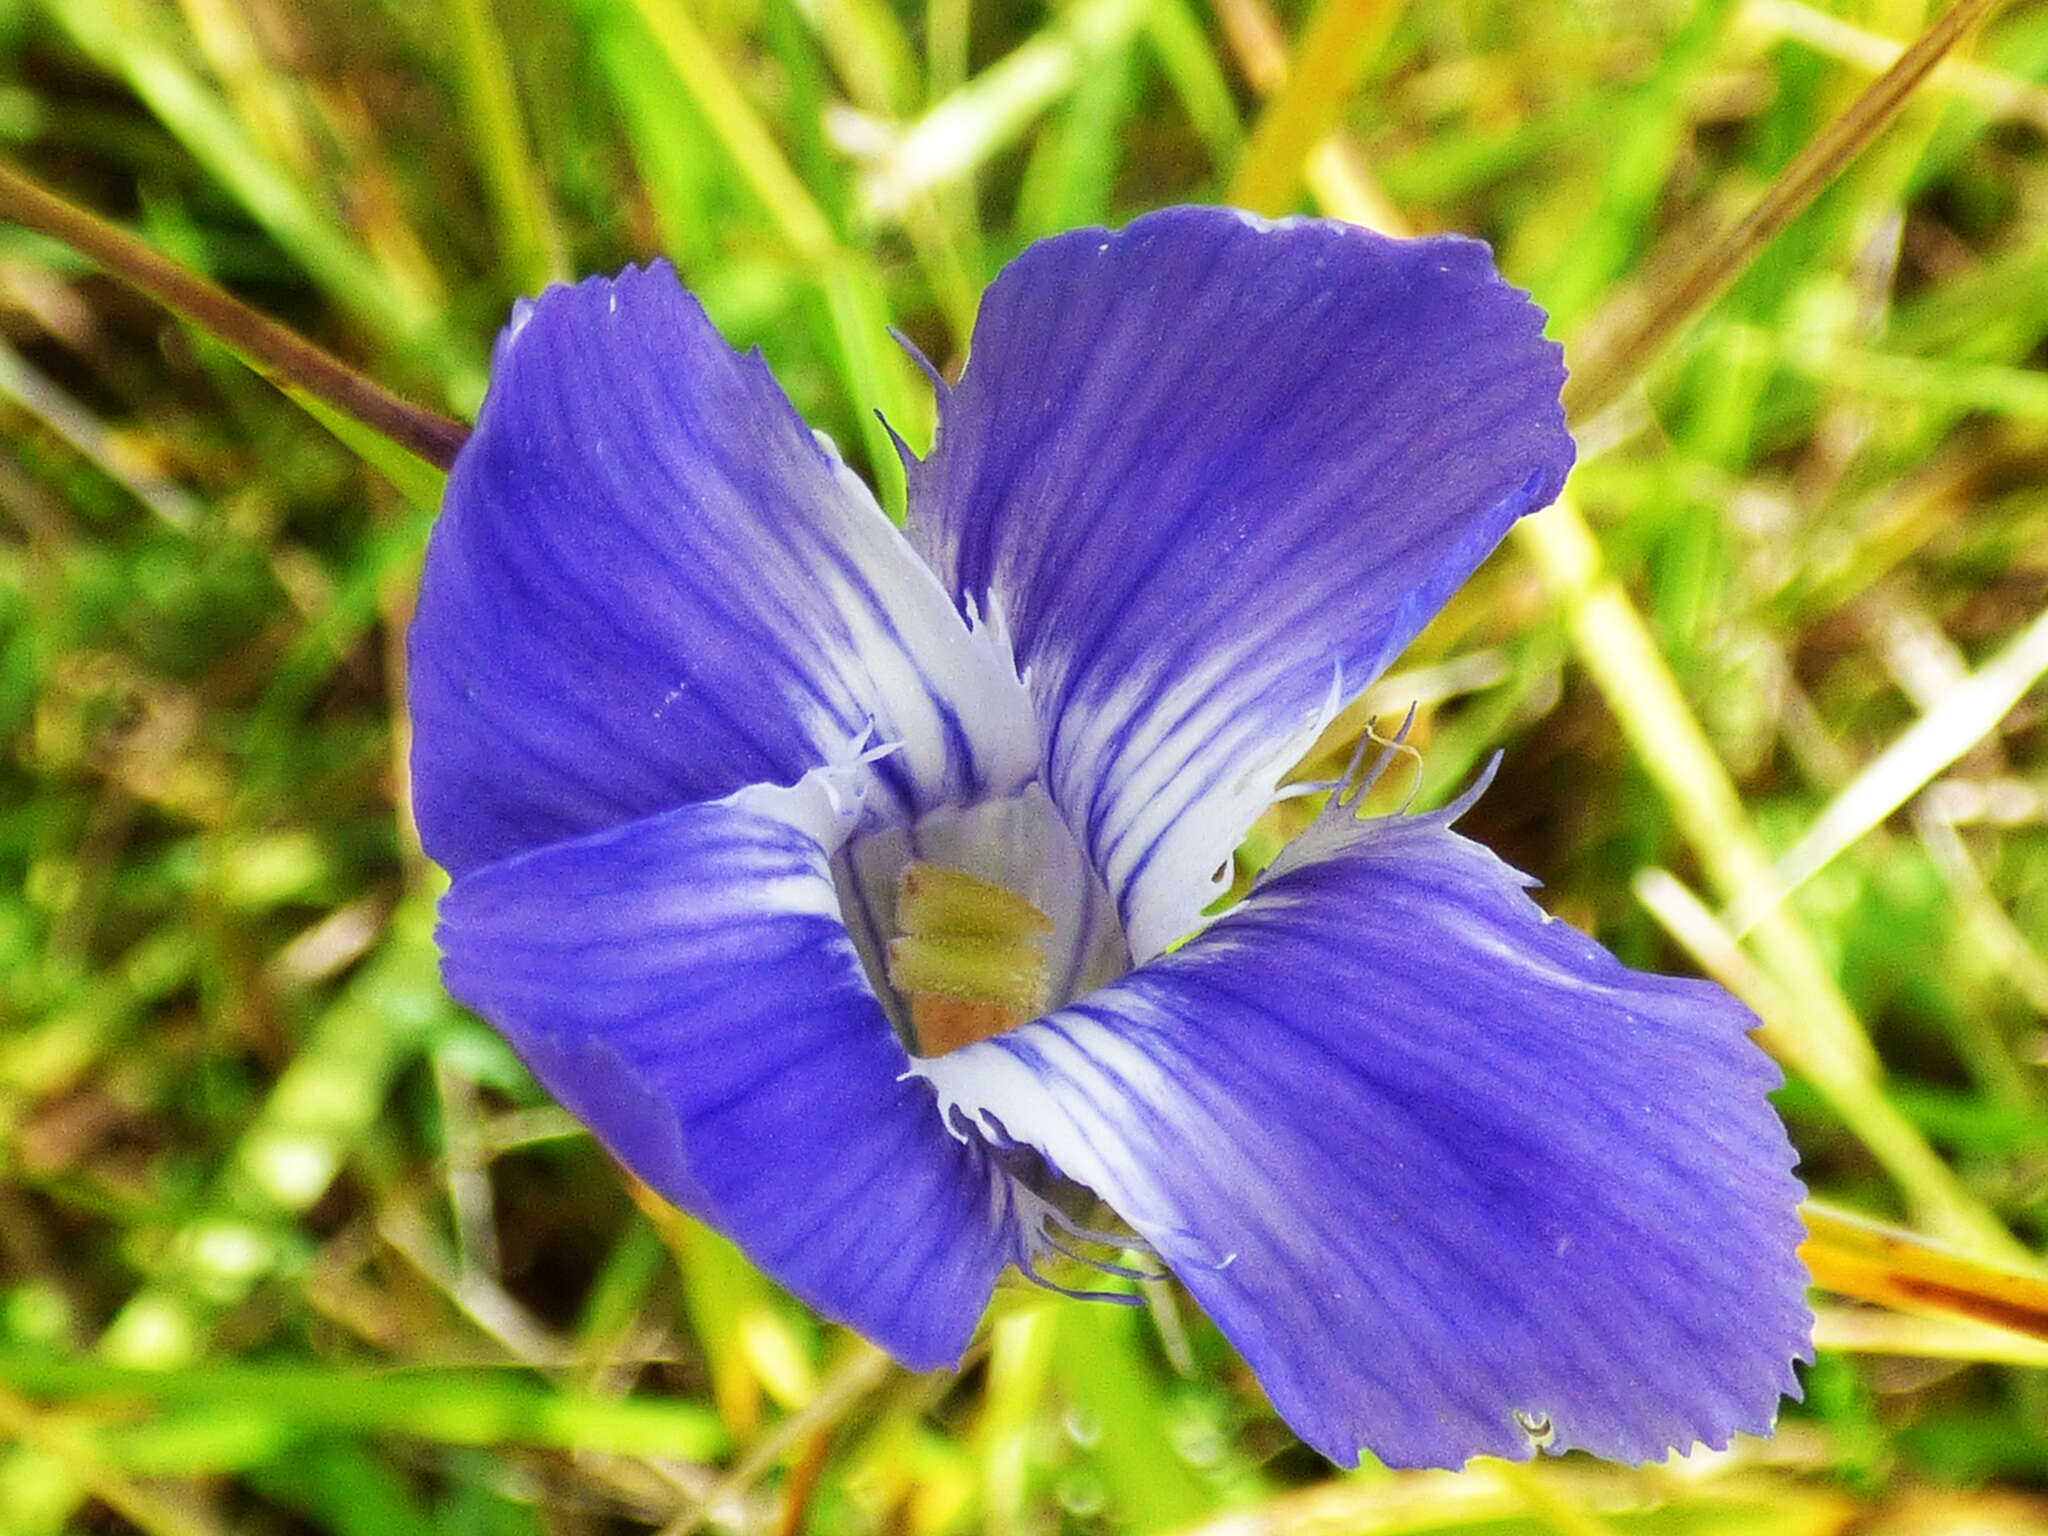 Image of grand fringed gentian